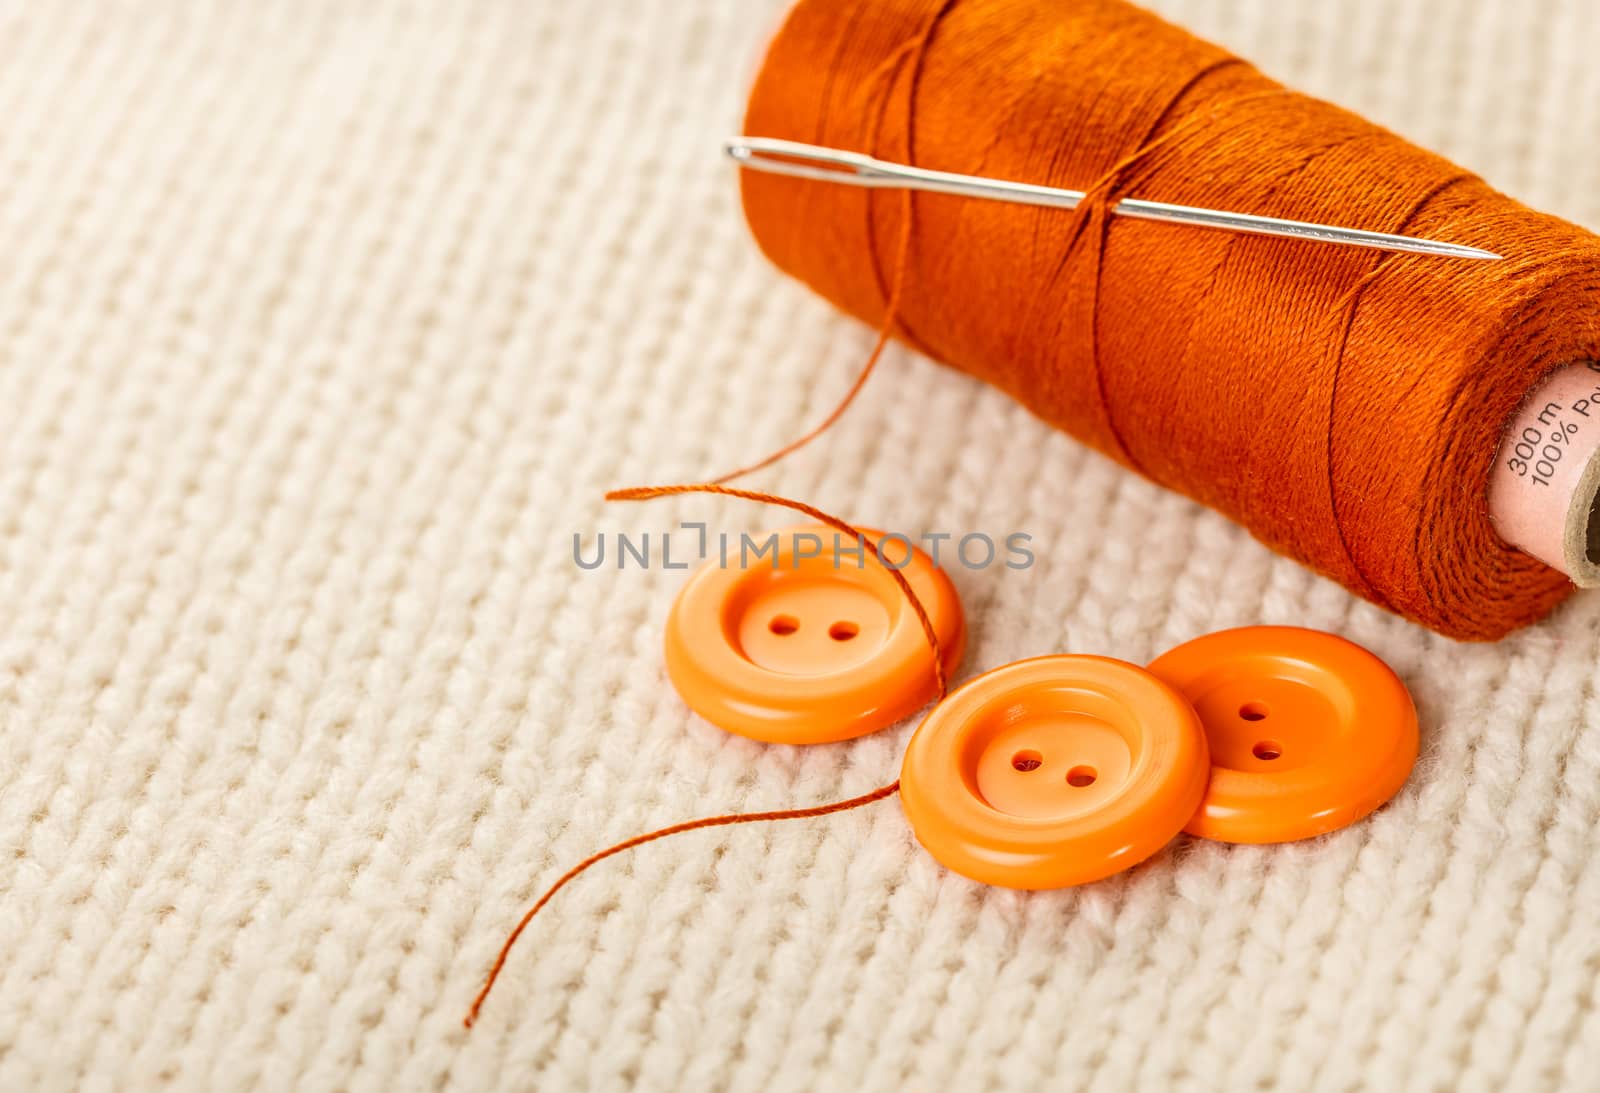 colored thread and buttons on white knitted fabric